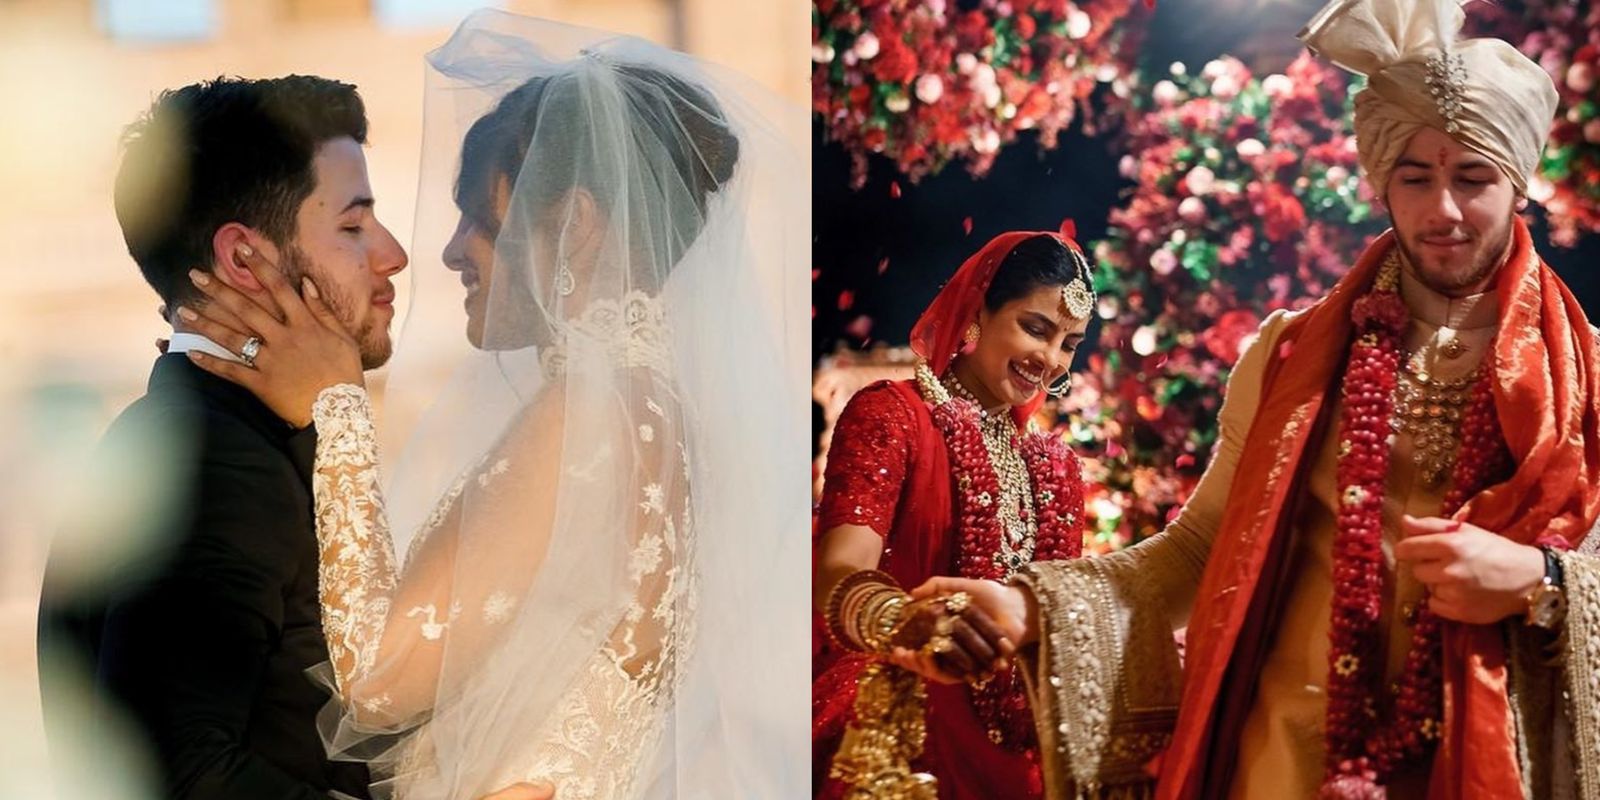 Priyanka Chopra And Nick Jonas Have The Most Heart-Warming Wish For Each Other On Their First Wedding Anniversary!